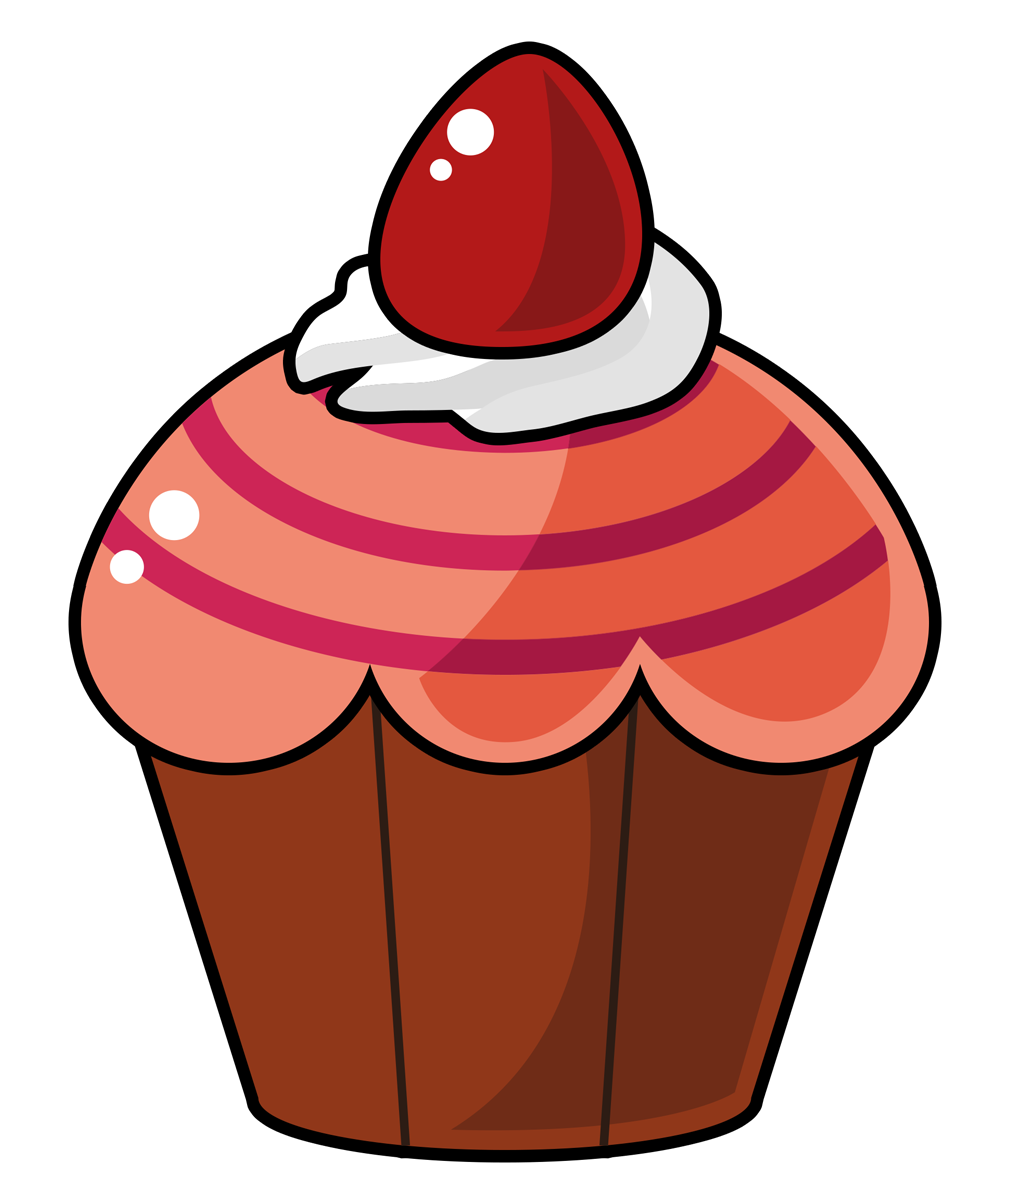 Are you looking for a cupcake